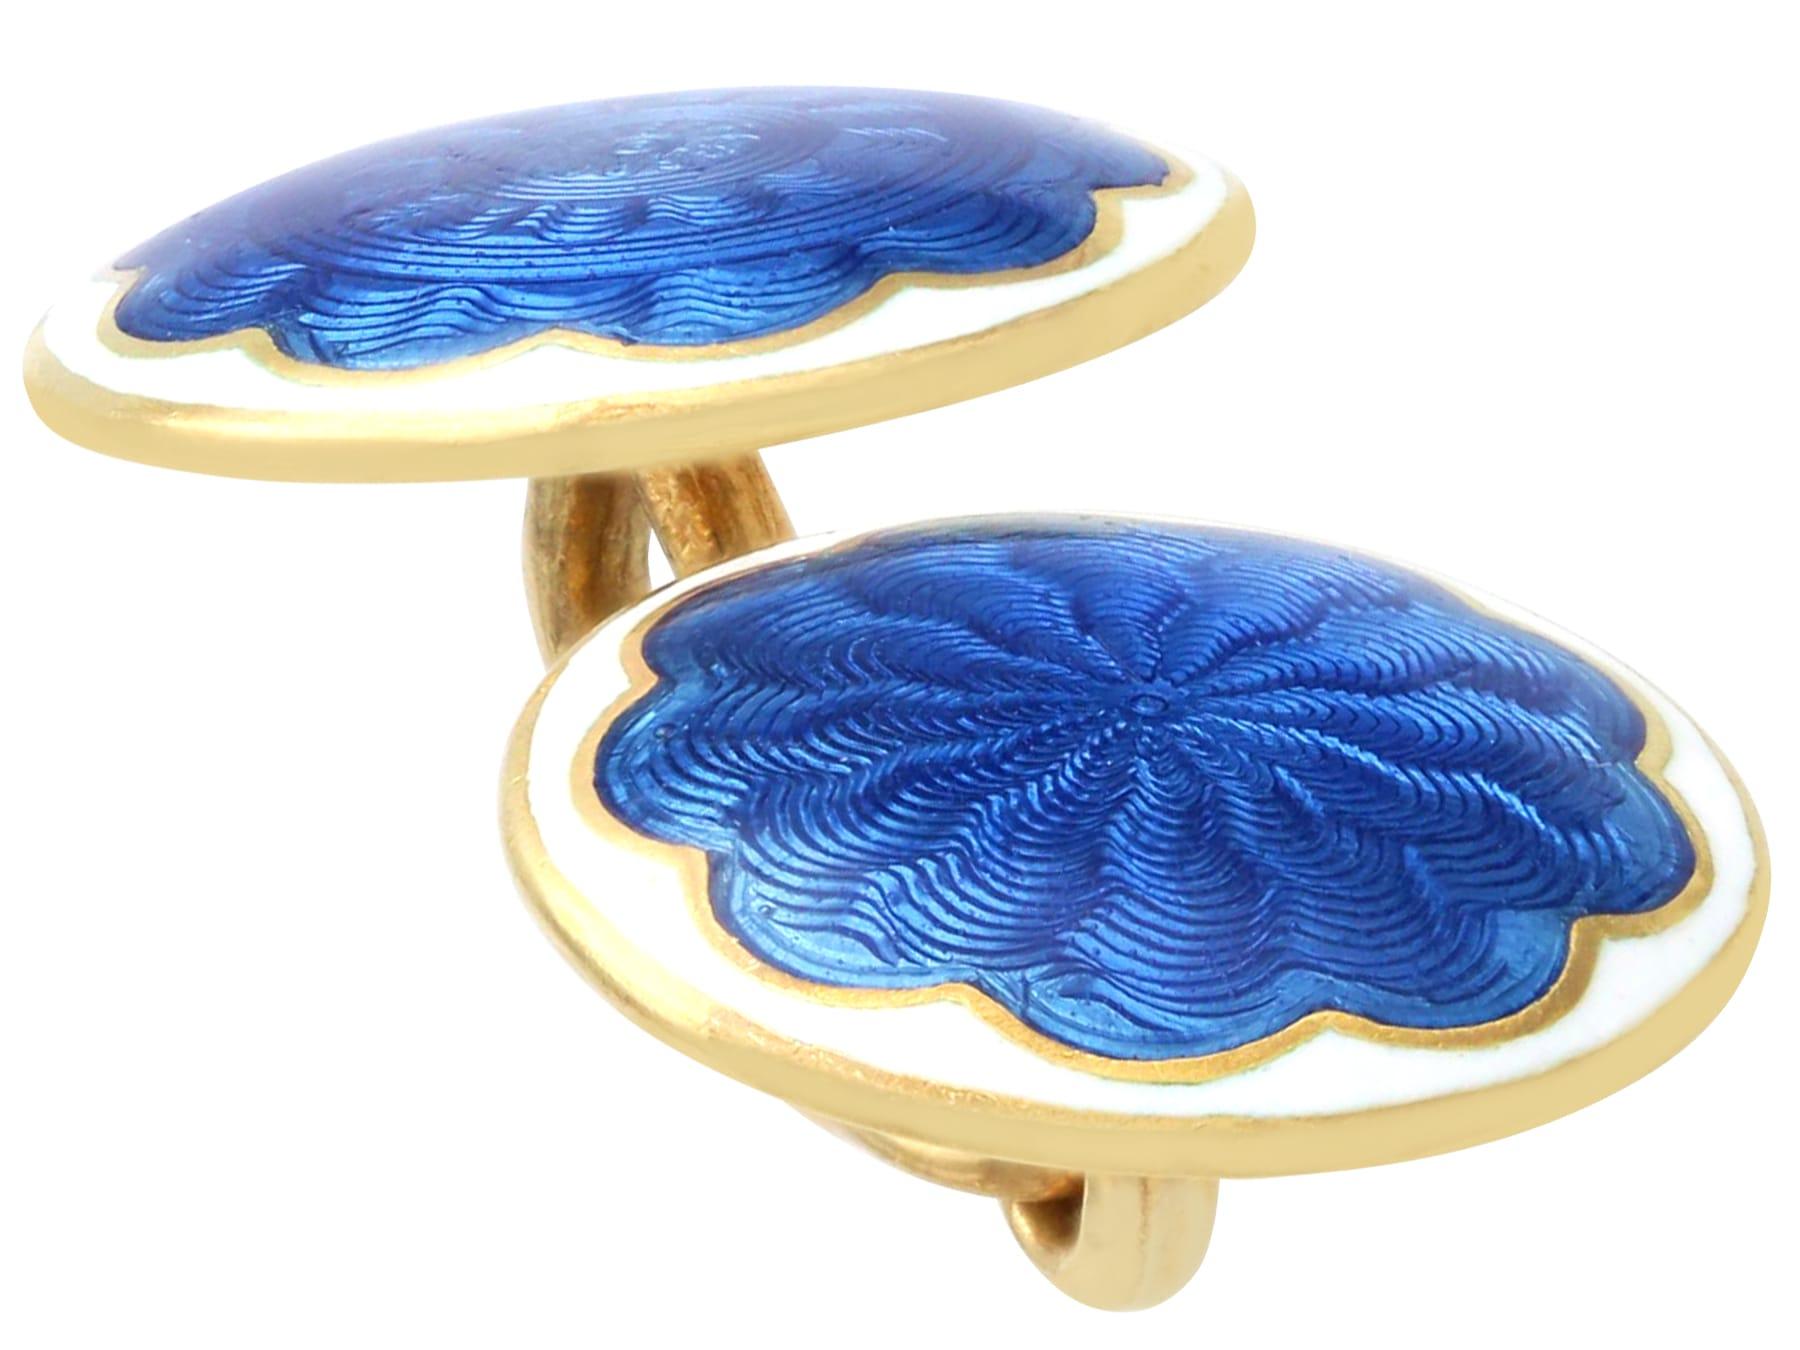 Antique Enamel and 18 Karat Yellow Gold Cufflinks In Excellent Condition For Sale In Jesmond, Newcastle Upon Tyne